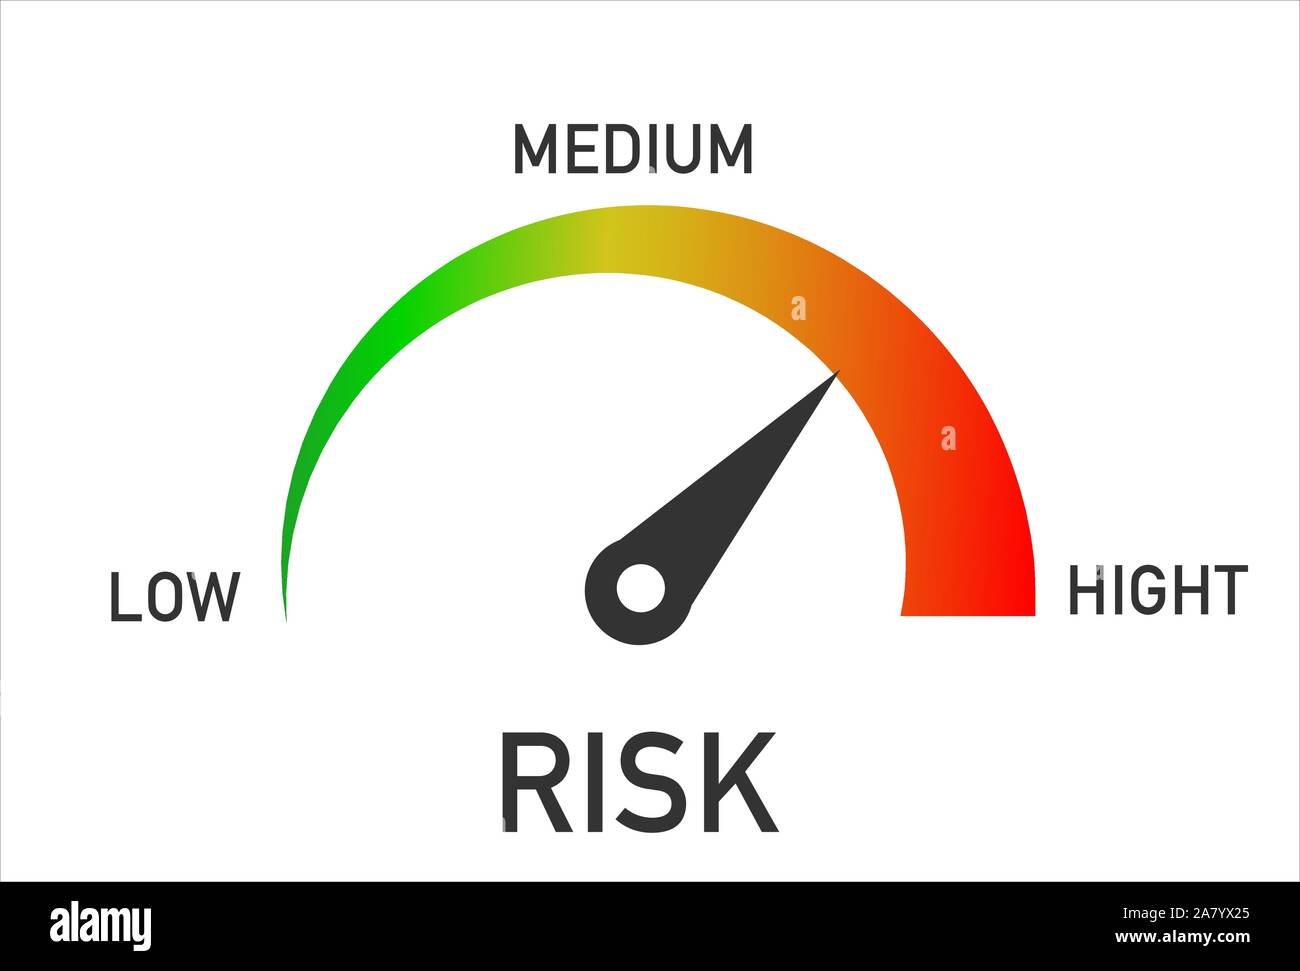 Risk Level Measure Meter From Low to High. Stock Vector